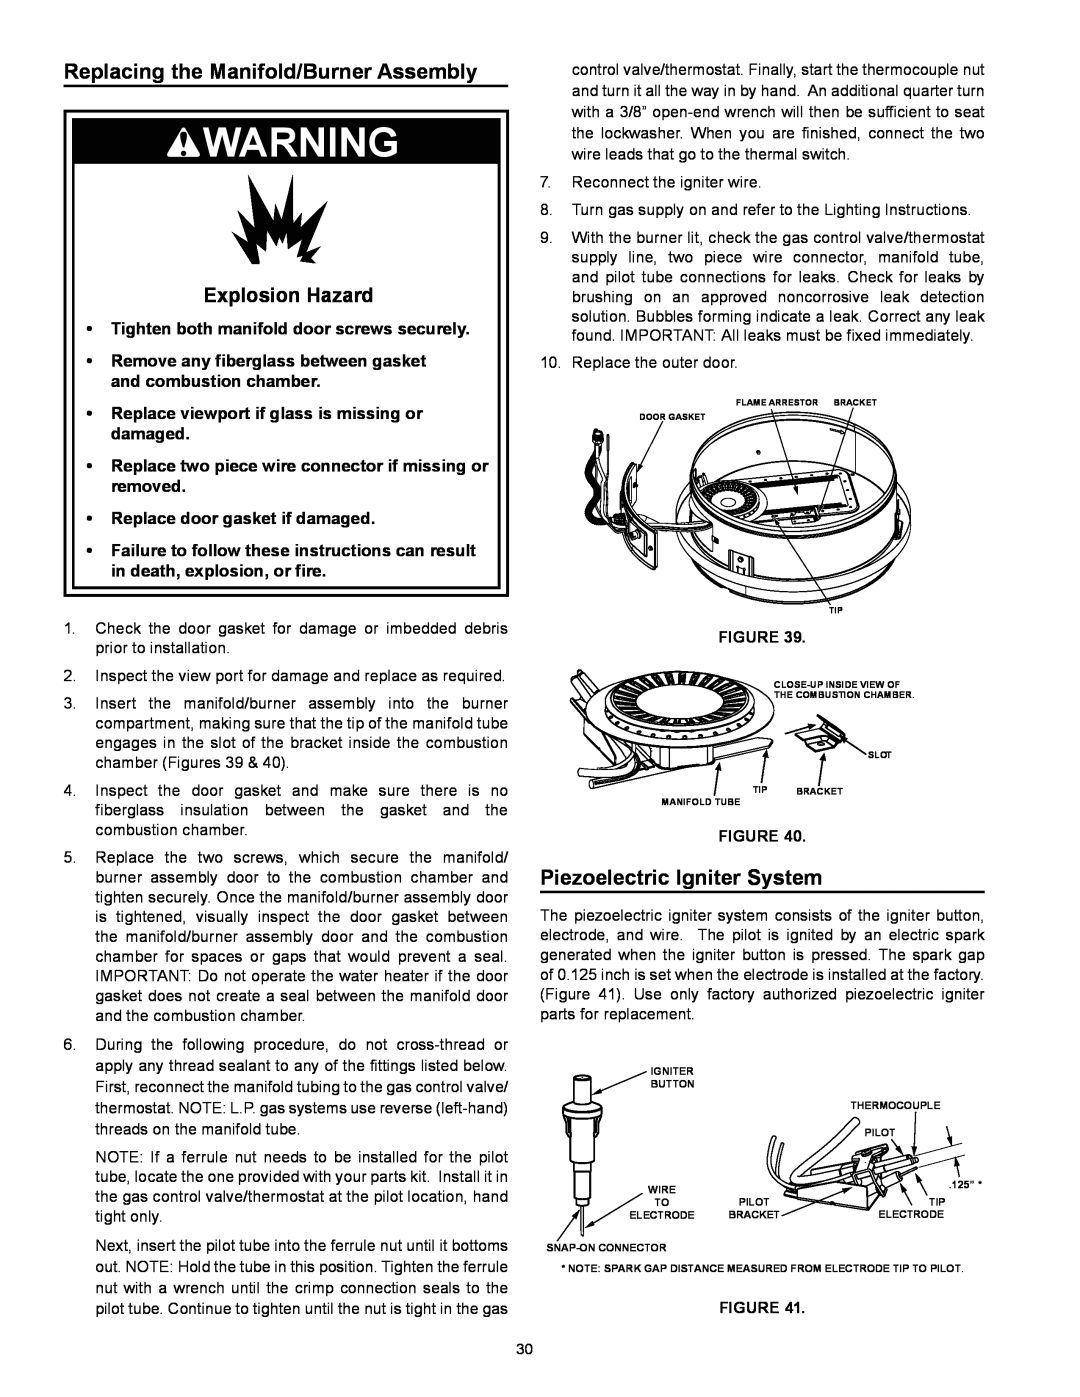 Kenmore 153.331572 owner manual Replacing the Manifold/Burner Assembly, Piezoelectric Igniter System, Explosion Hazard 